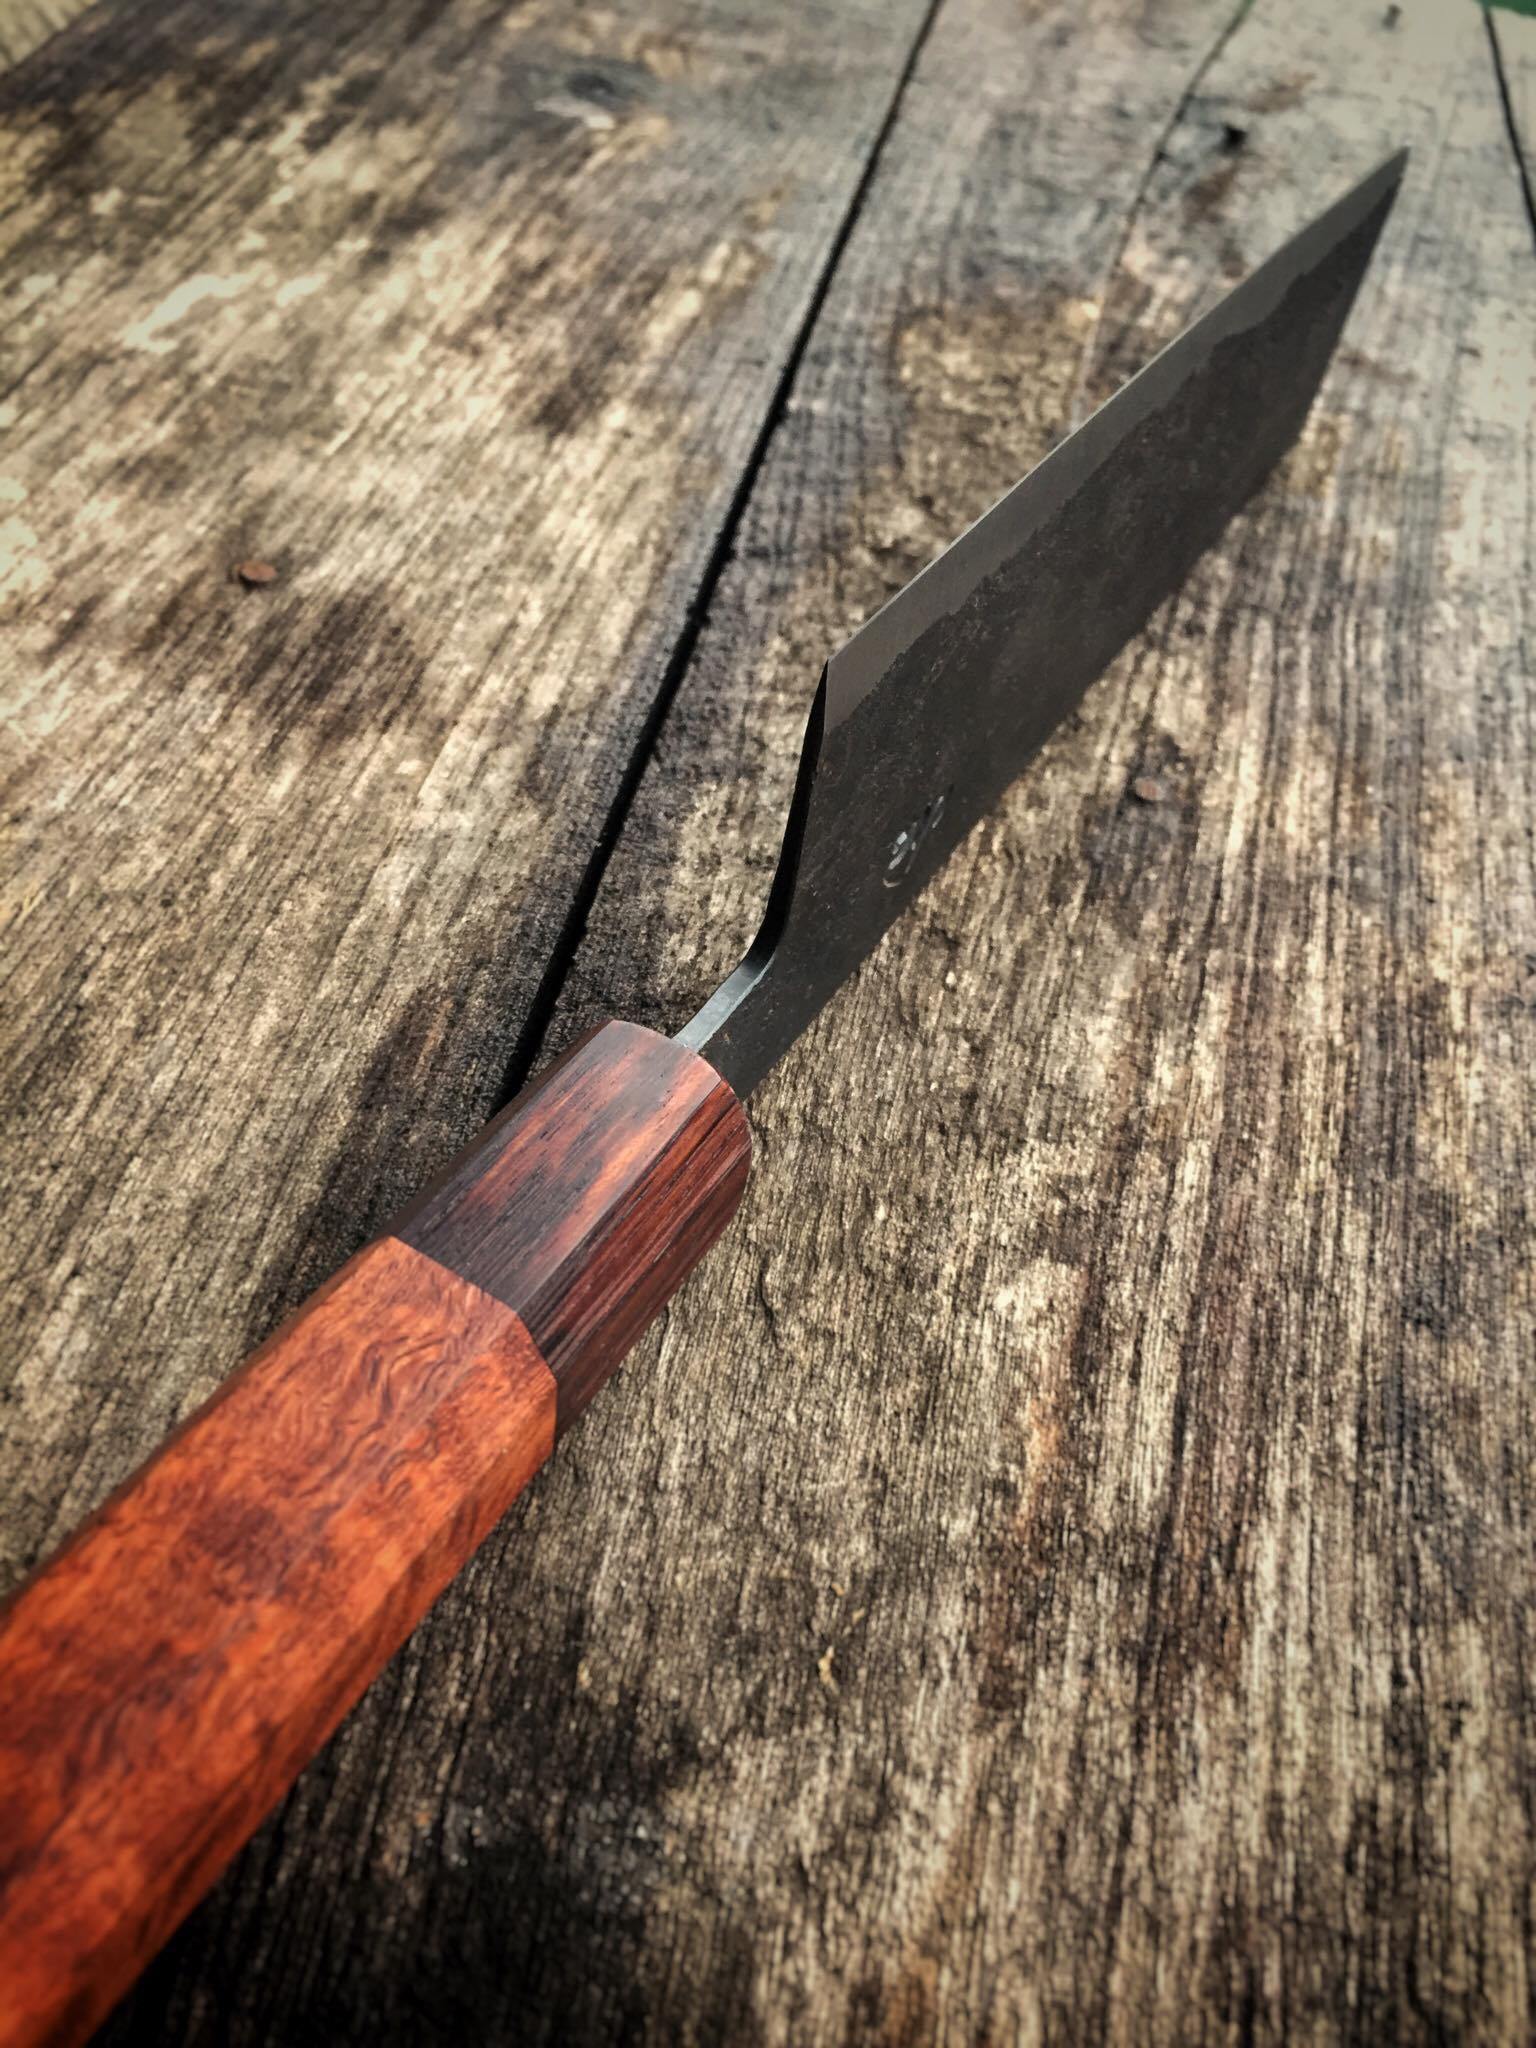 Making a Knife from an Old Chisel 